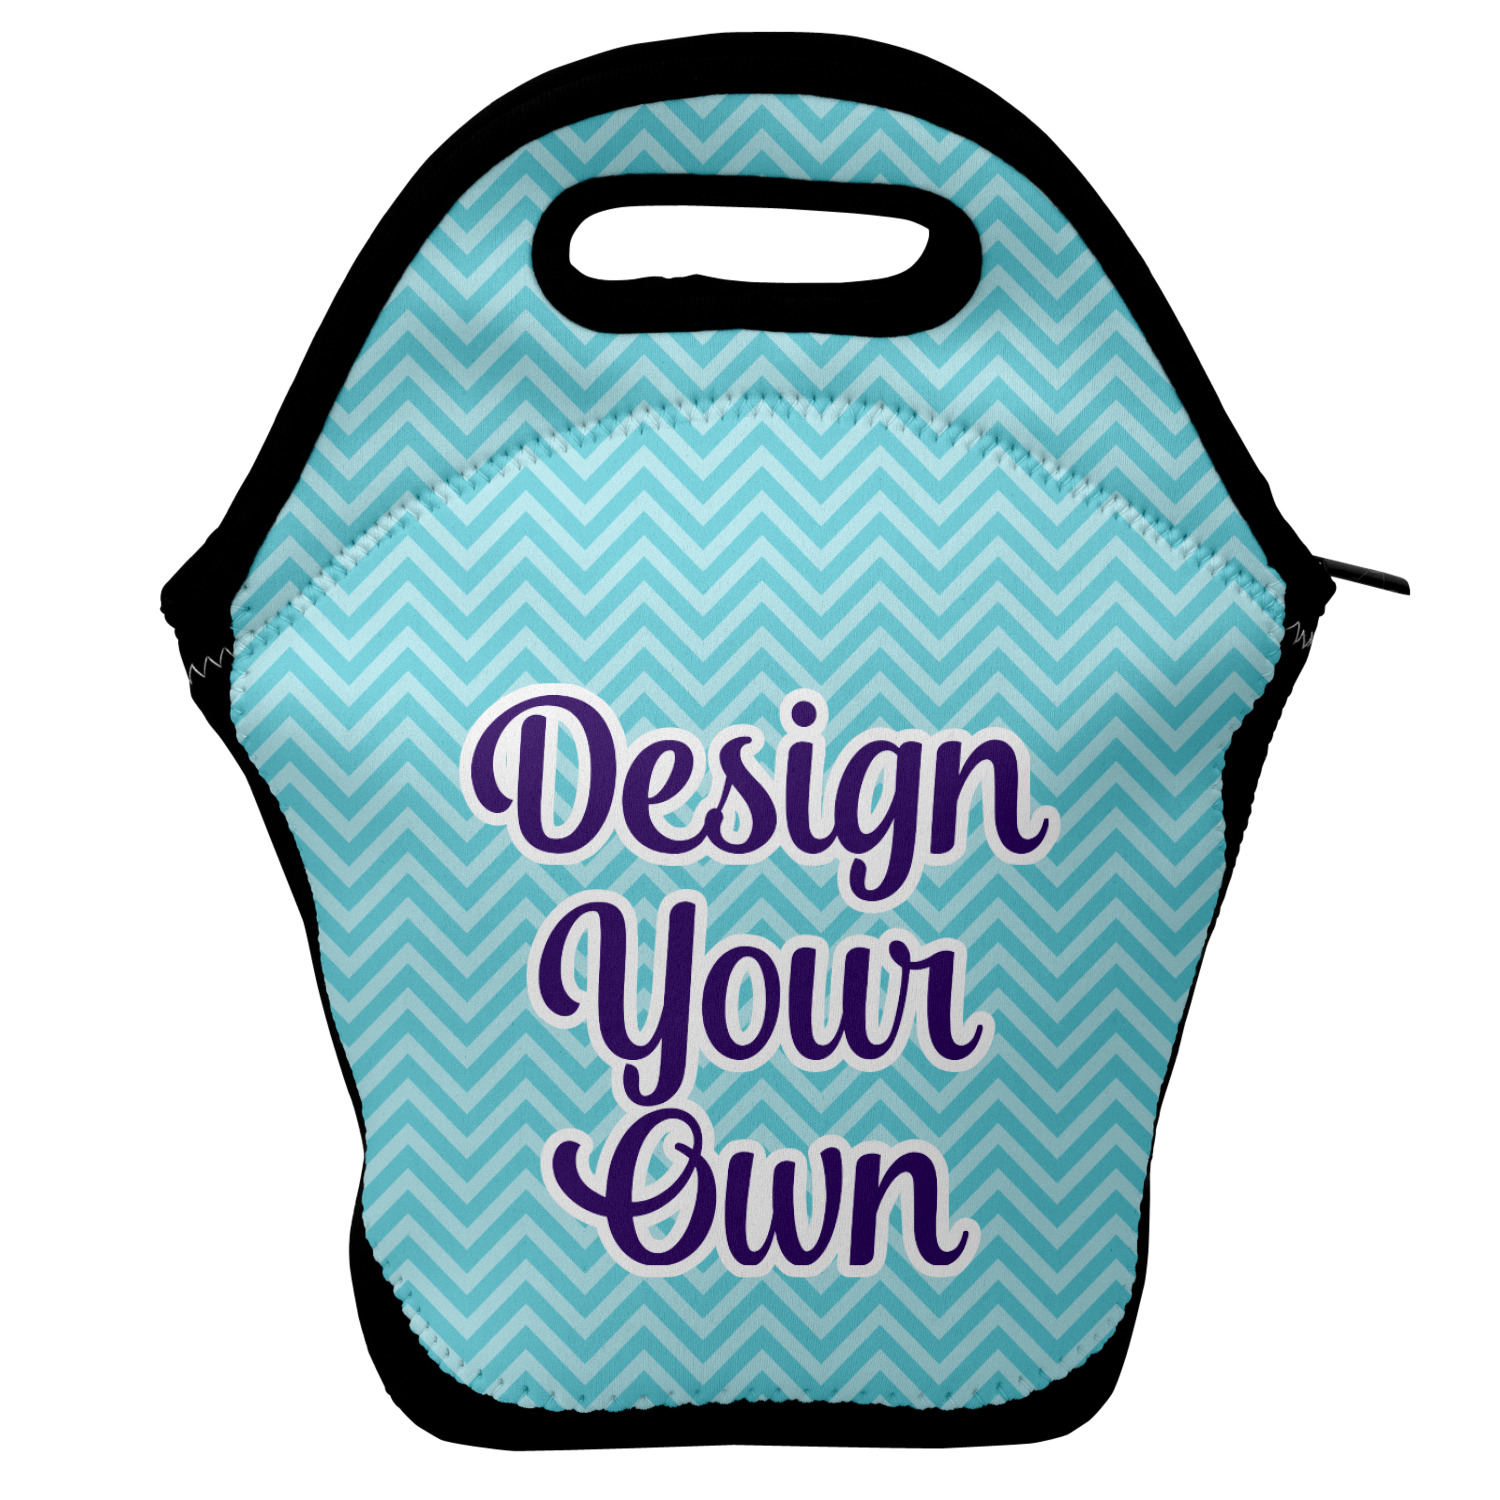 https://www.youcustomizeit.com/common/MAKE/965833/Design-Your-Own-Lunch-Bag-Front.jpg?lm=1562956522